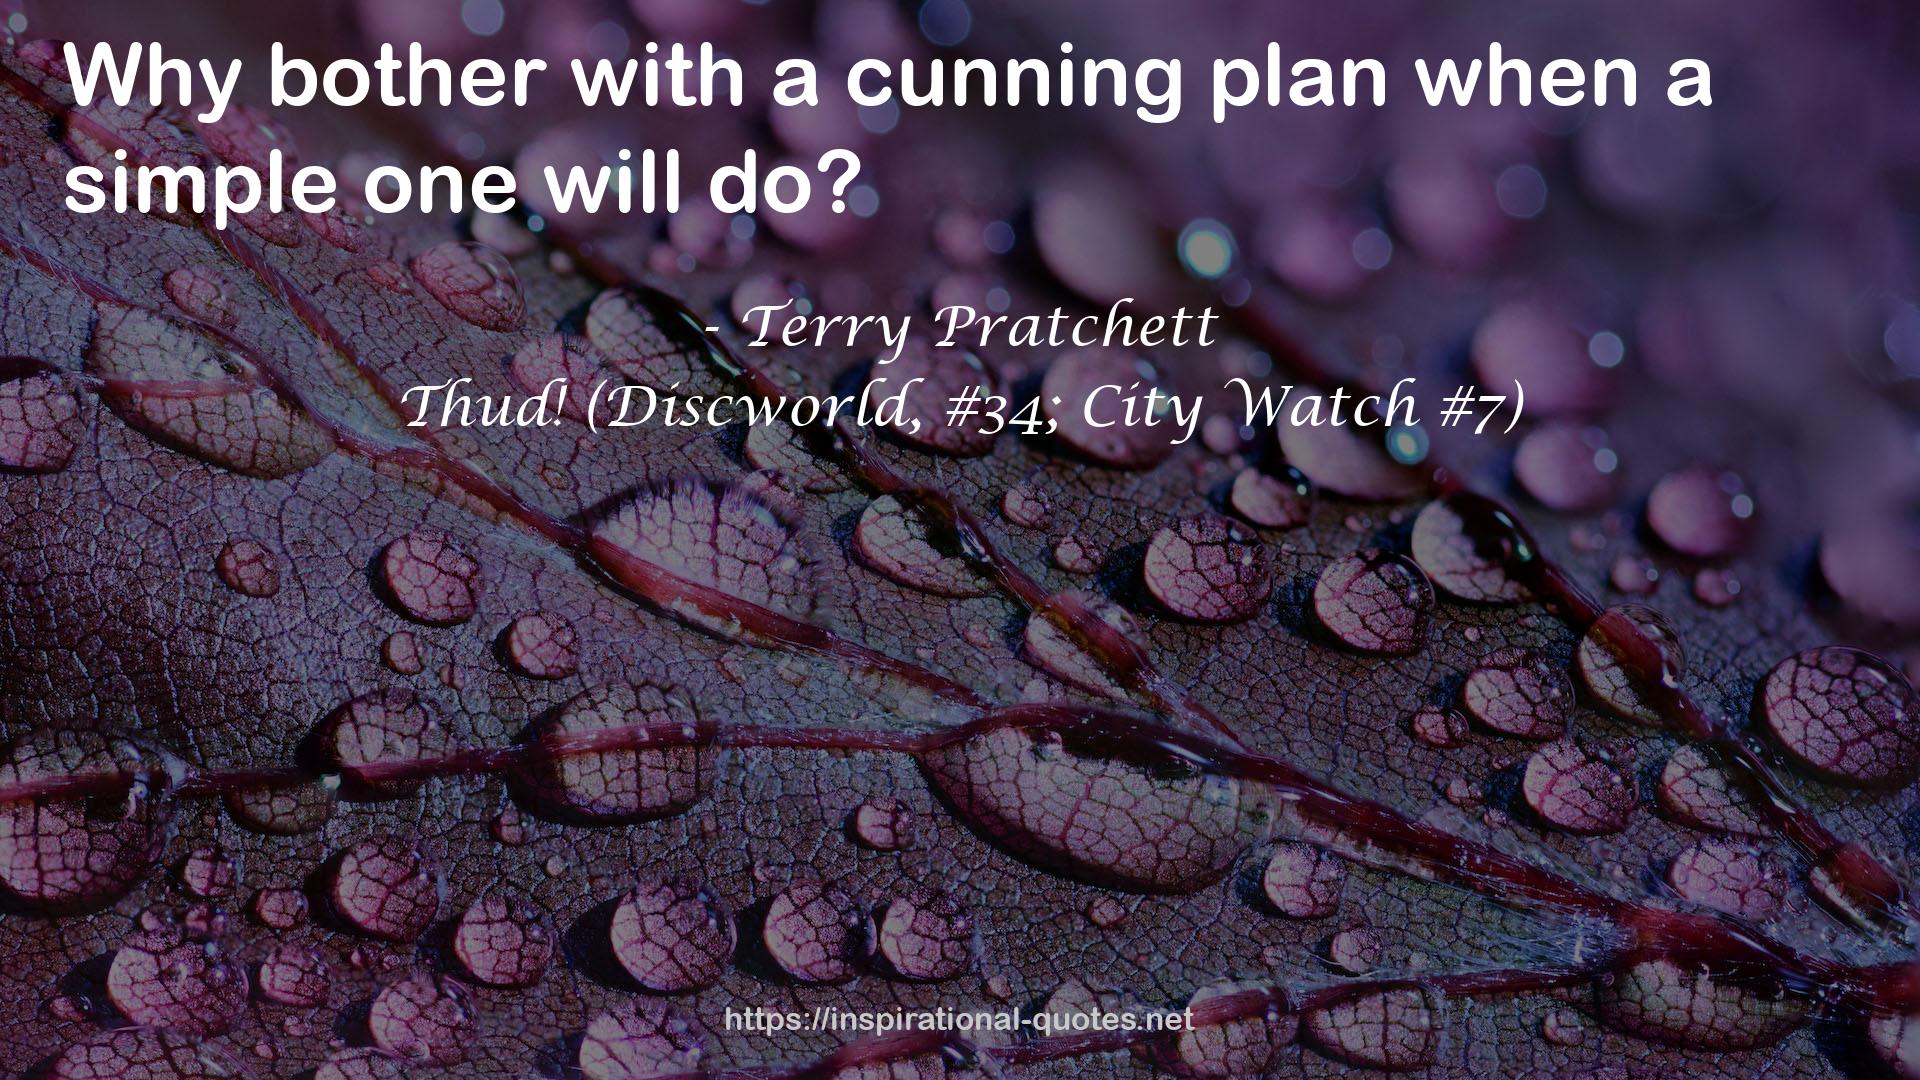 Thud! (Discworld, #34; City Watch #7) QUOTES